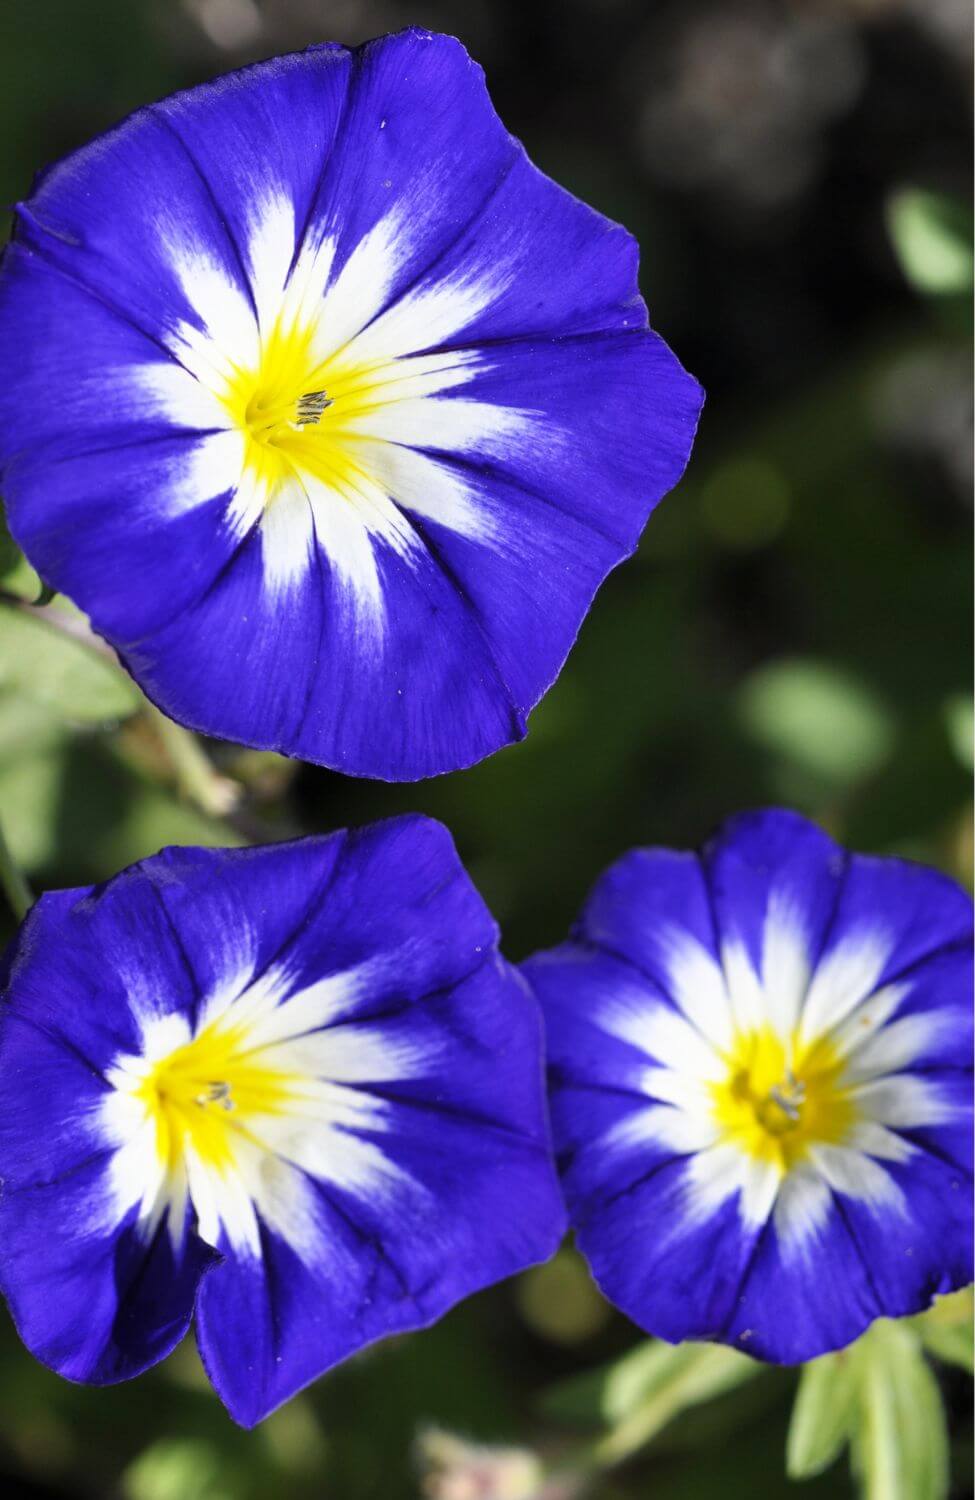 Premium Purple Convolvulus Tricolor Seeds - Start a mesmerizing floral display with these high-quality seeds